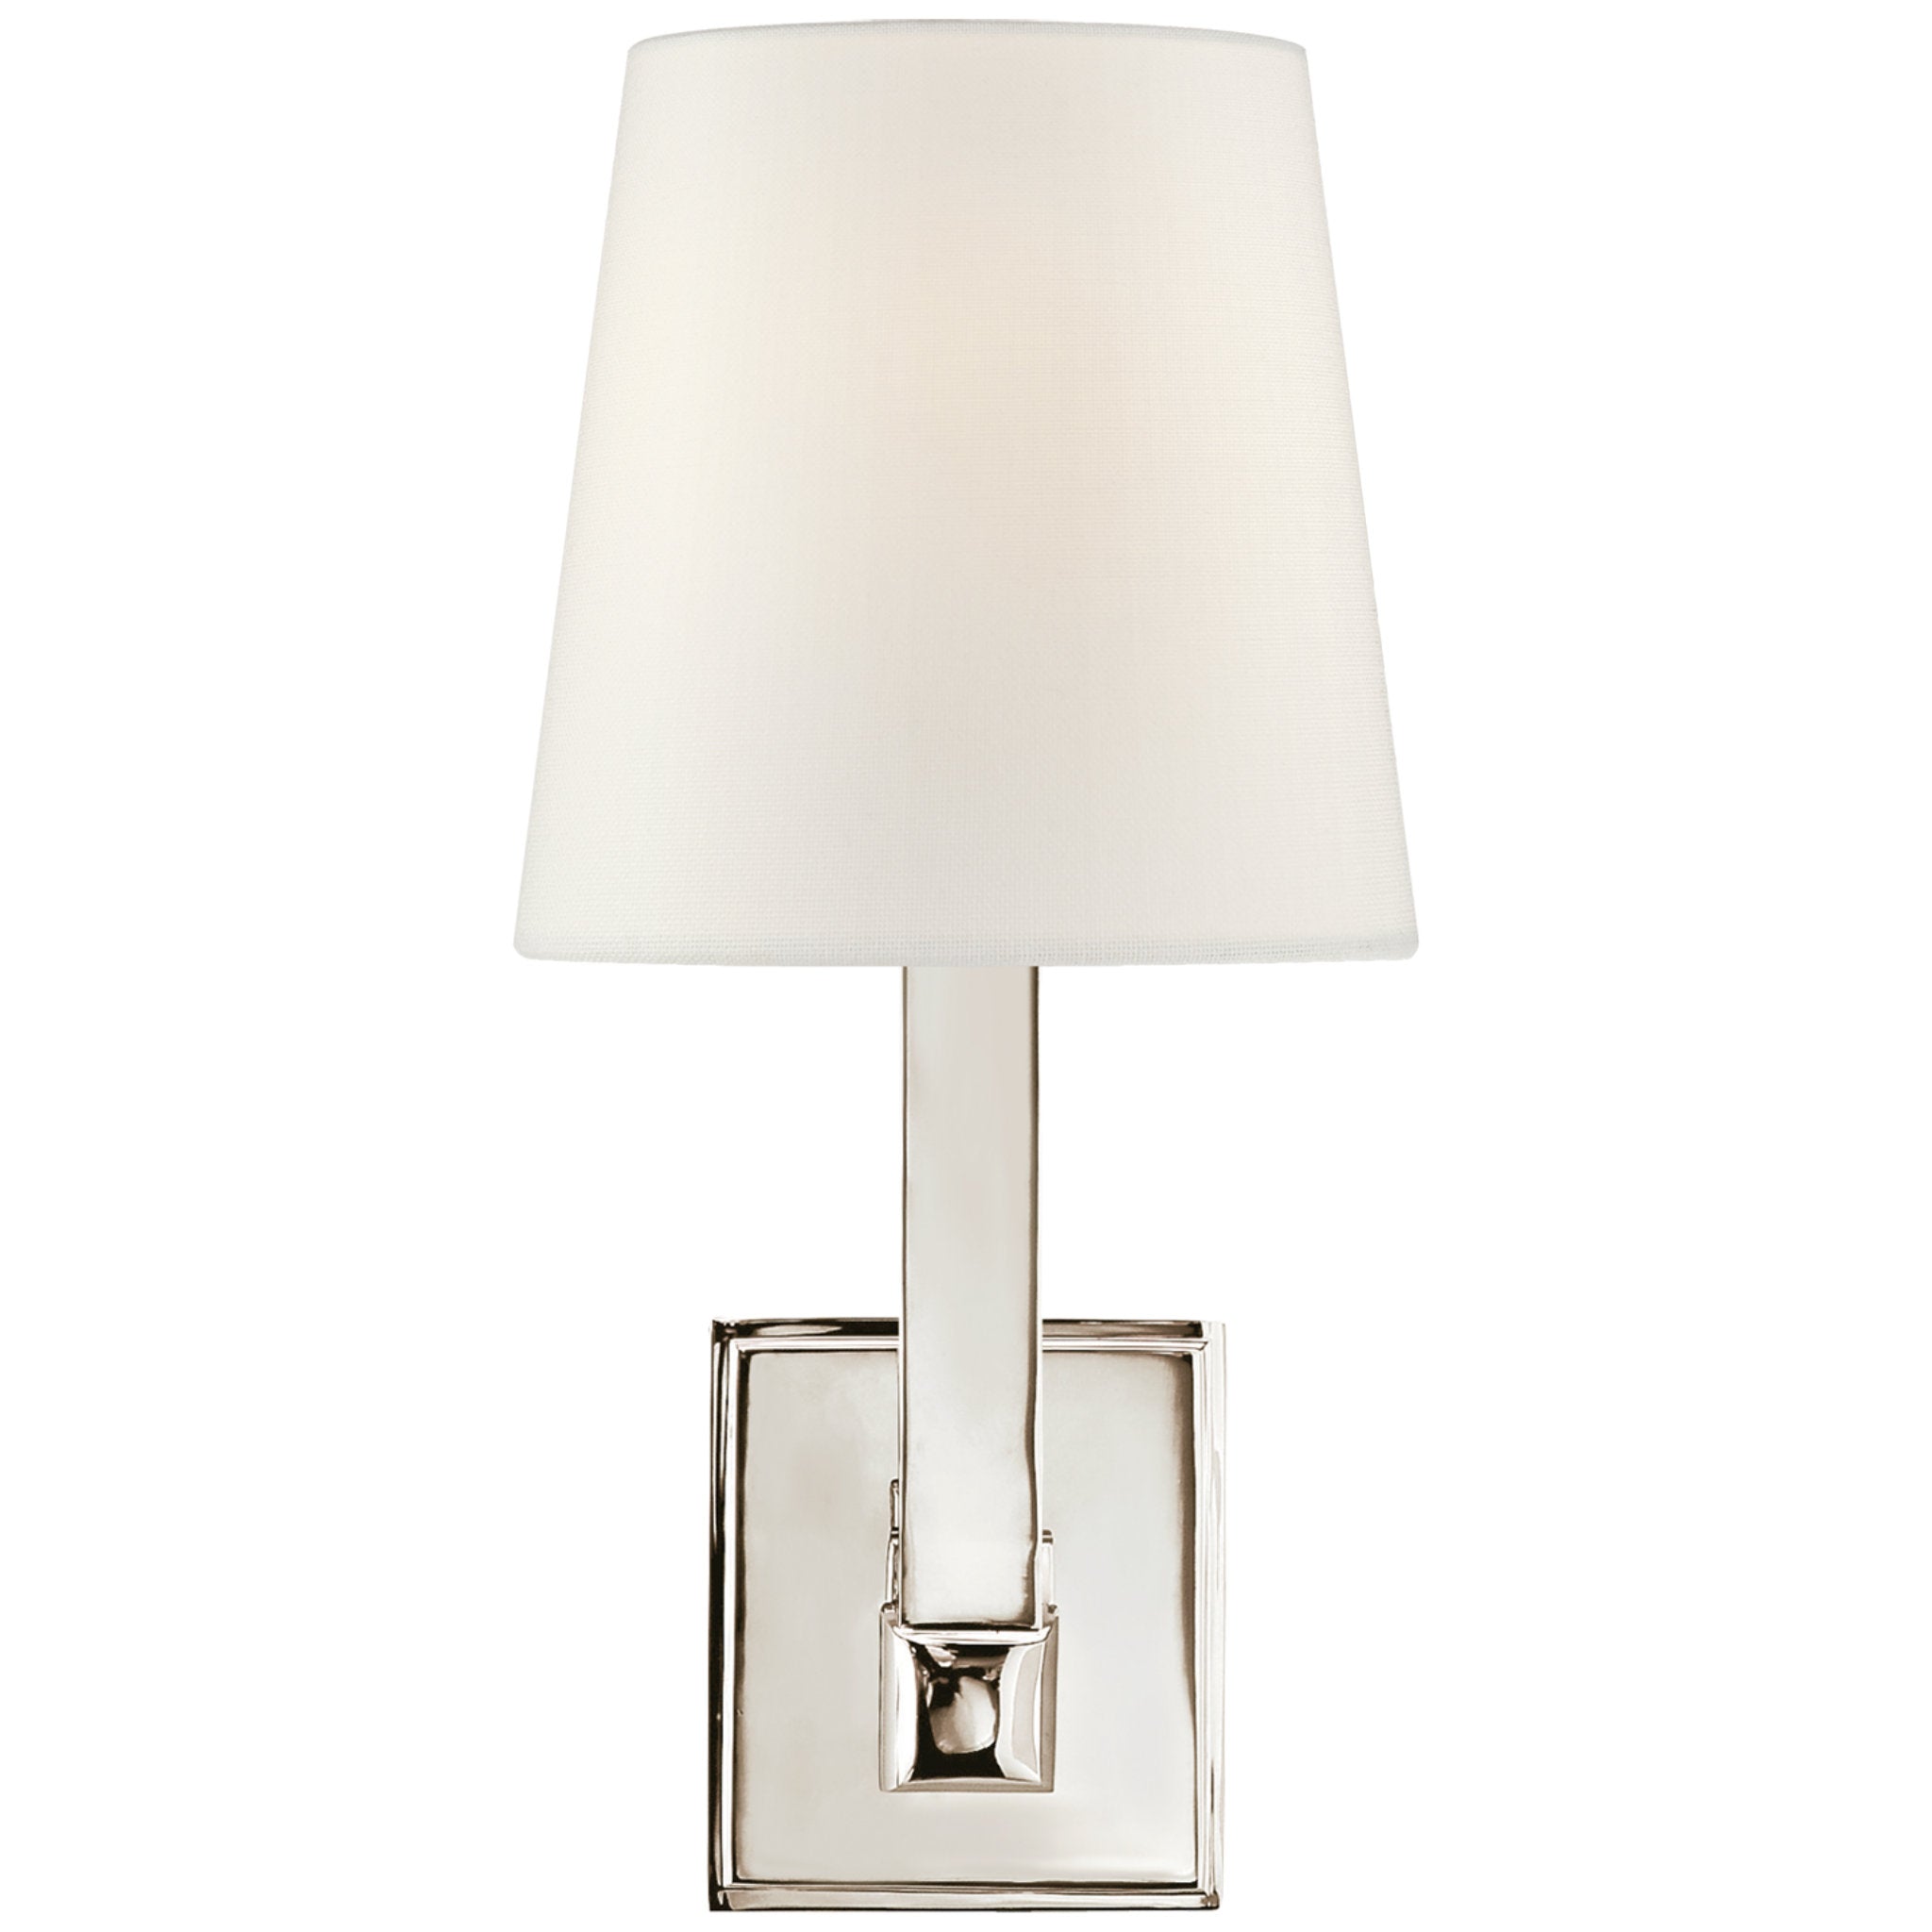 Chapman & Myers Square Tube Single Sconce in Polished Nickel with Linen Shade